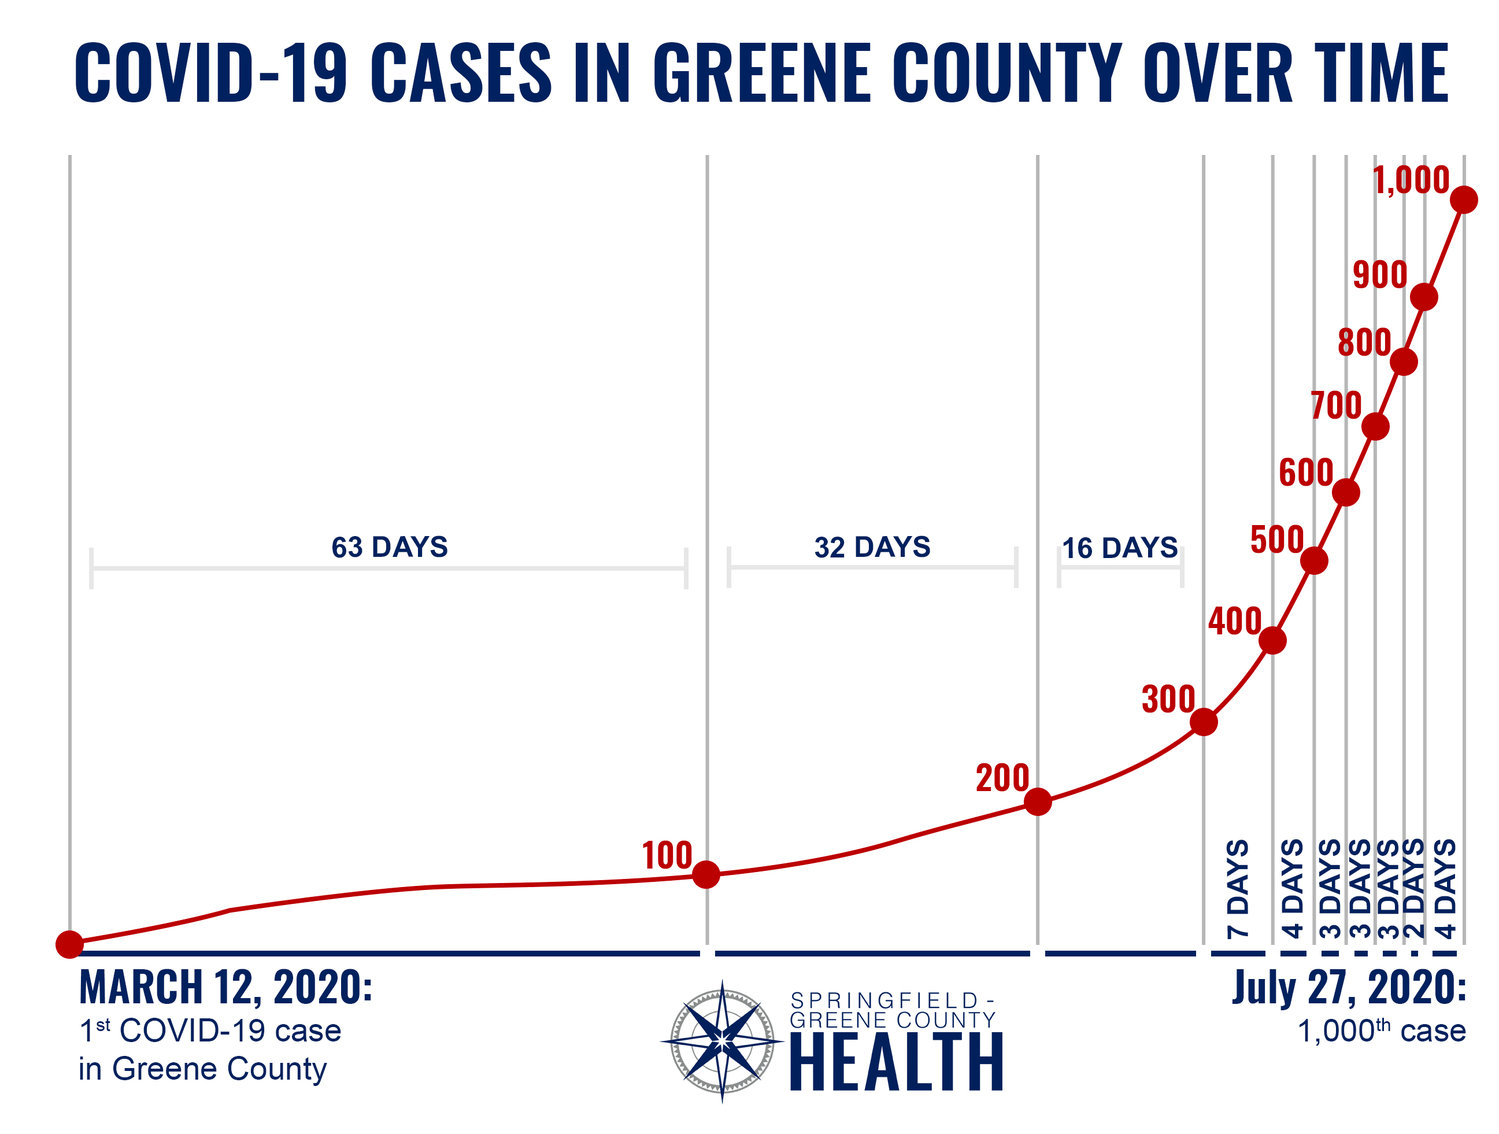 On July 27, Greene County reached 1,000 positive COVID-19 cases.